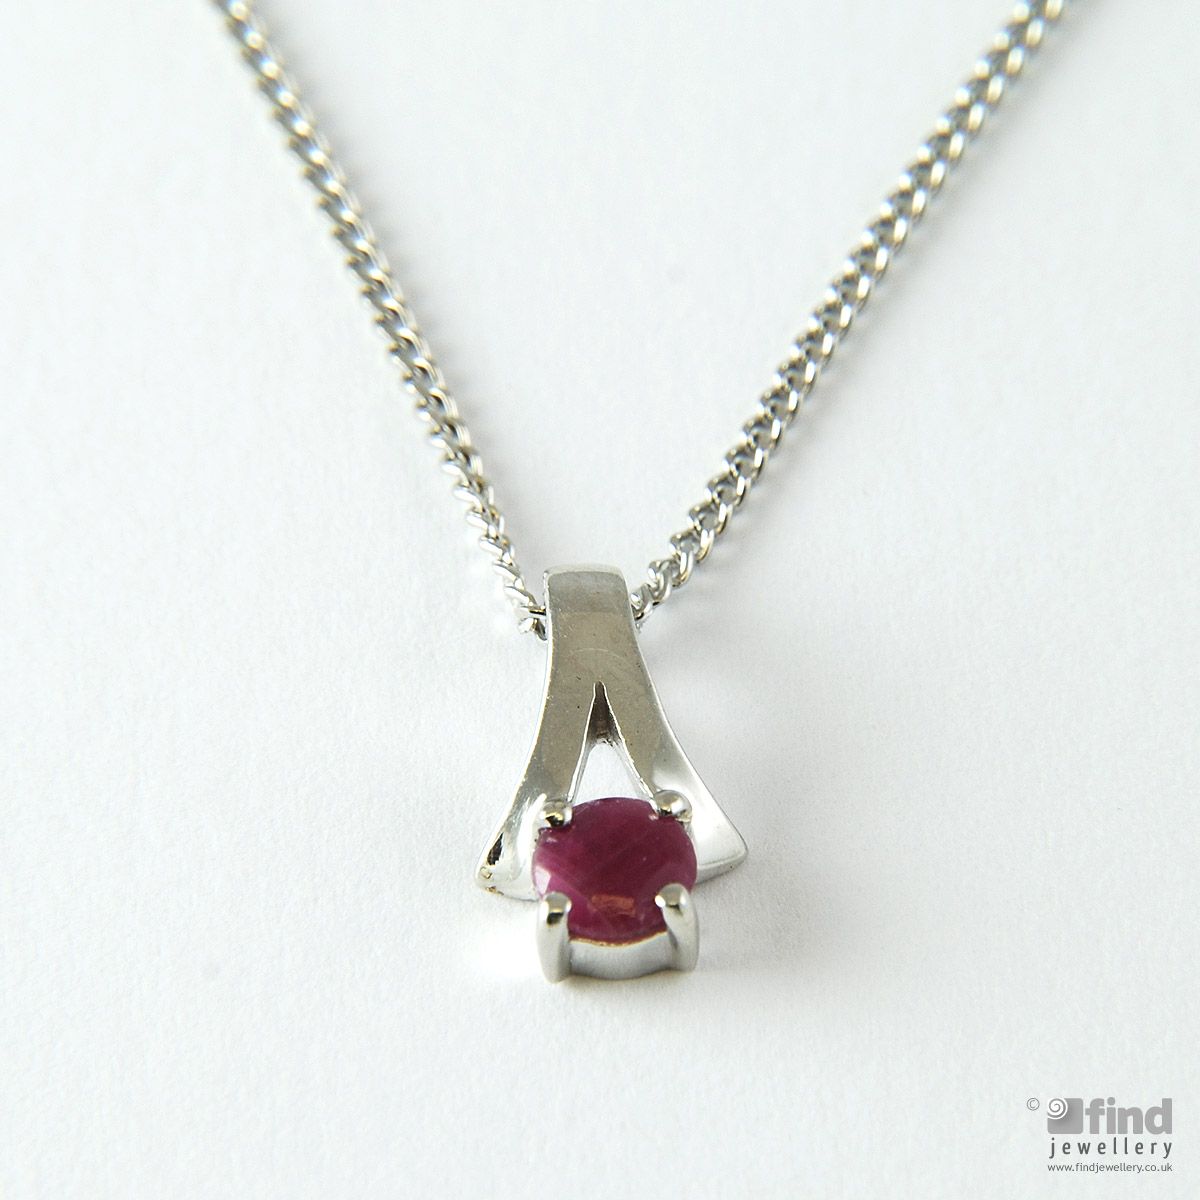 Ladies Sterling Silver Ruby Pendant Necklace